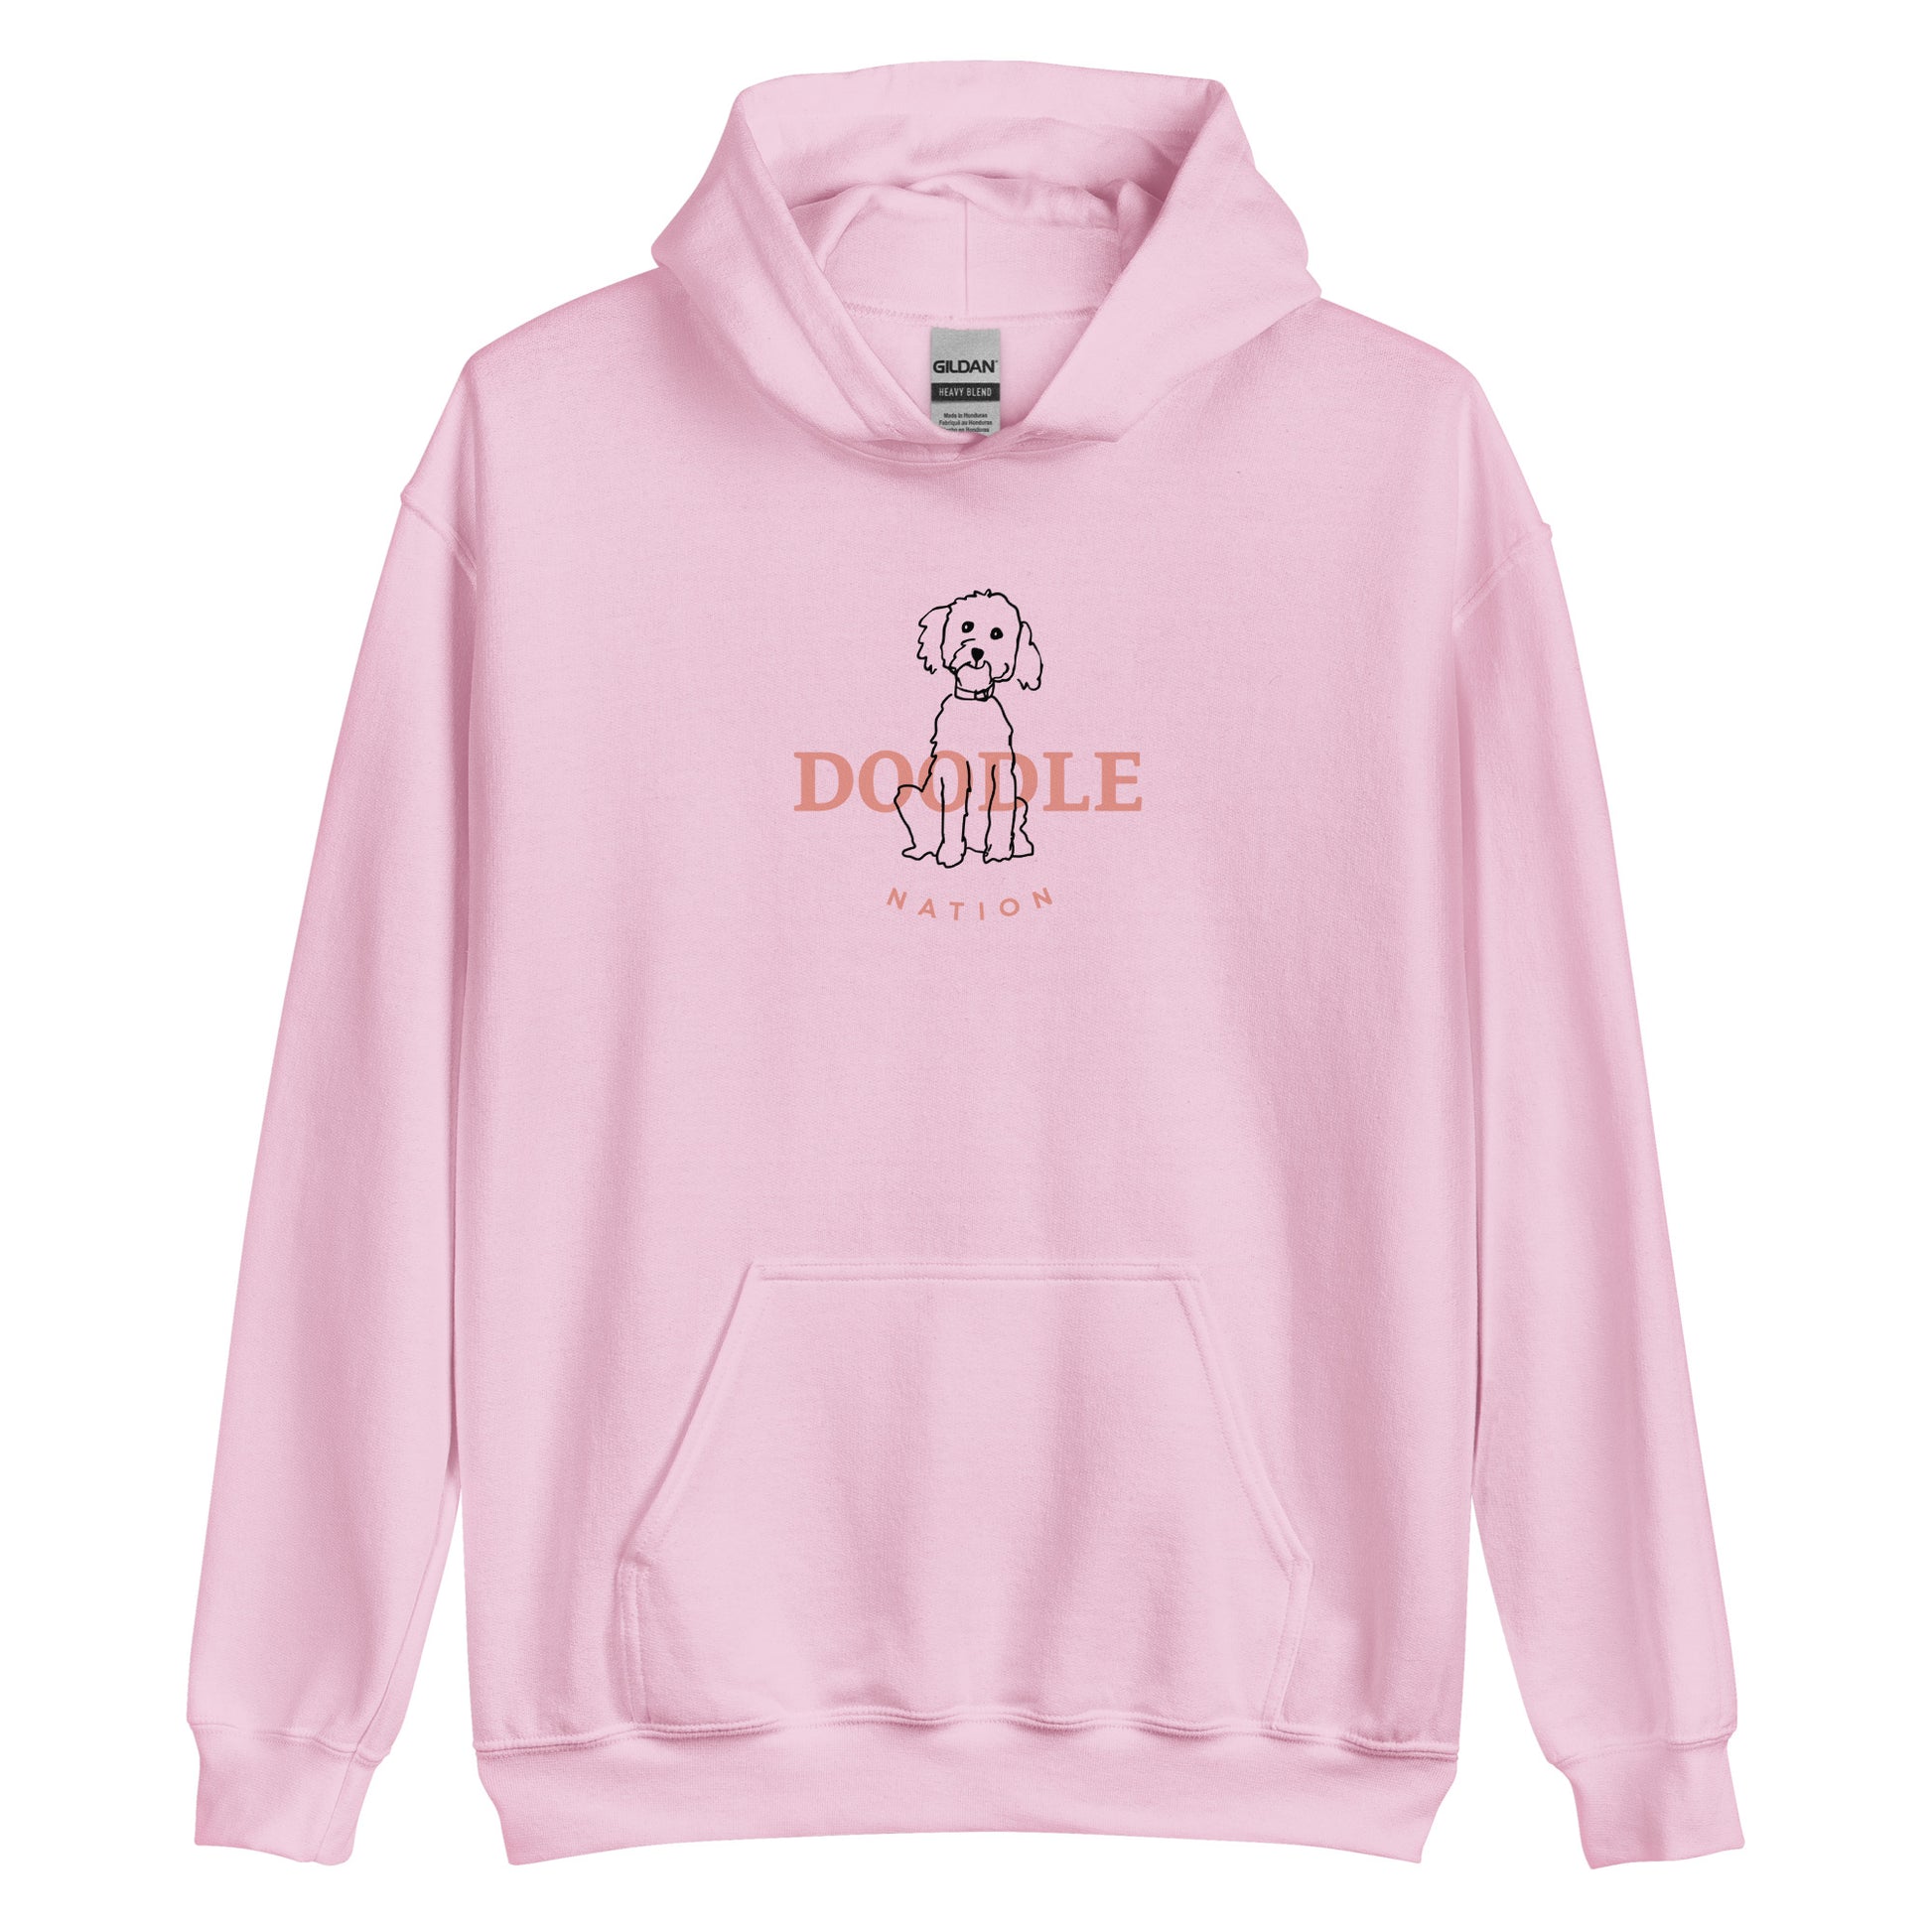 Goldendoodle hoodie with Goldendoodle and words "Doodle Nation" in light pink color